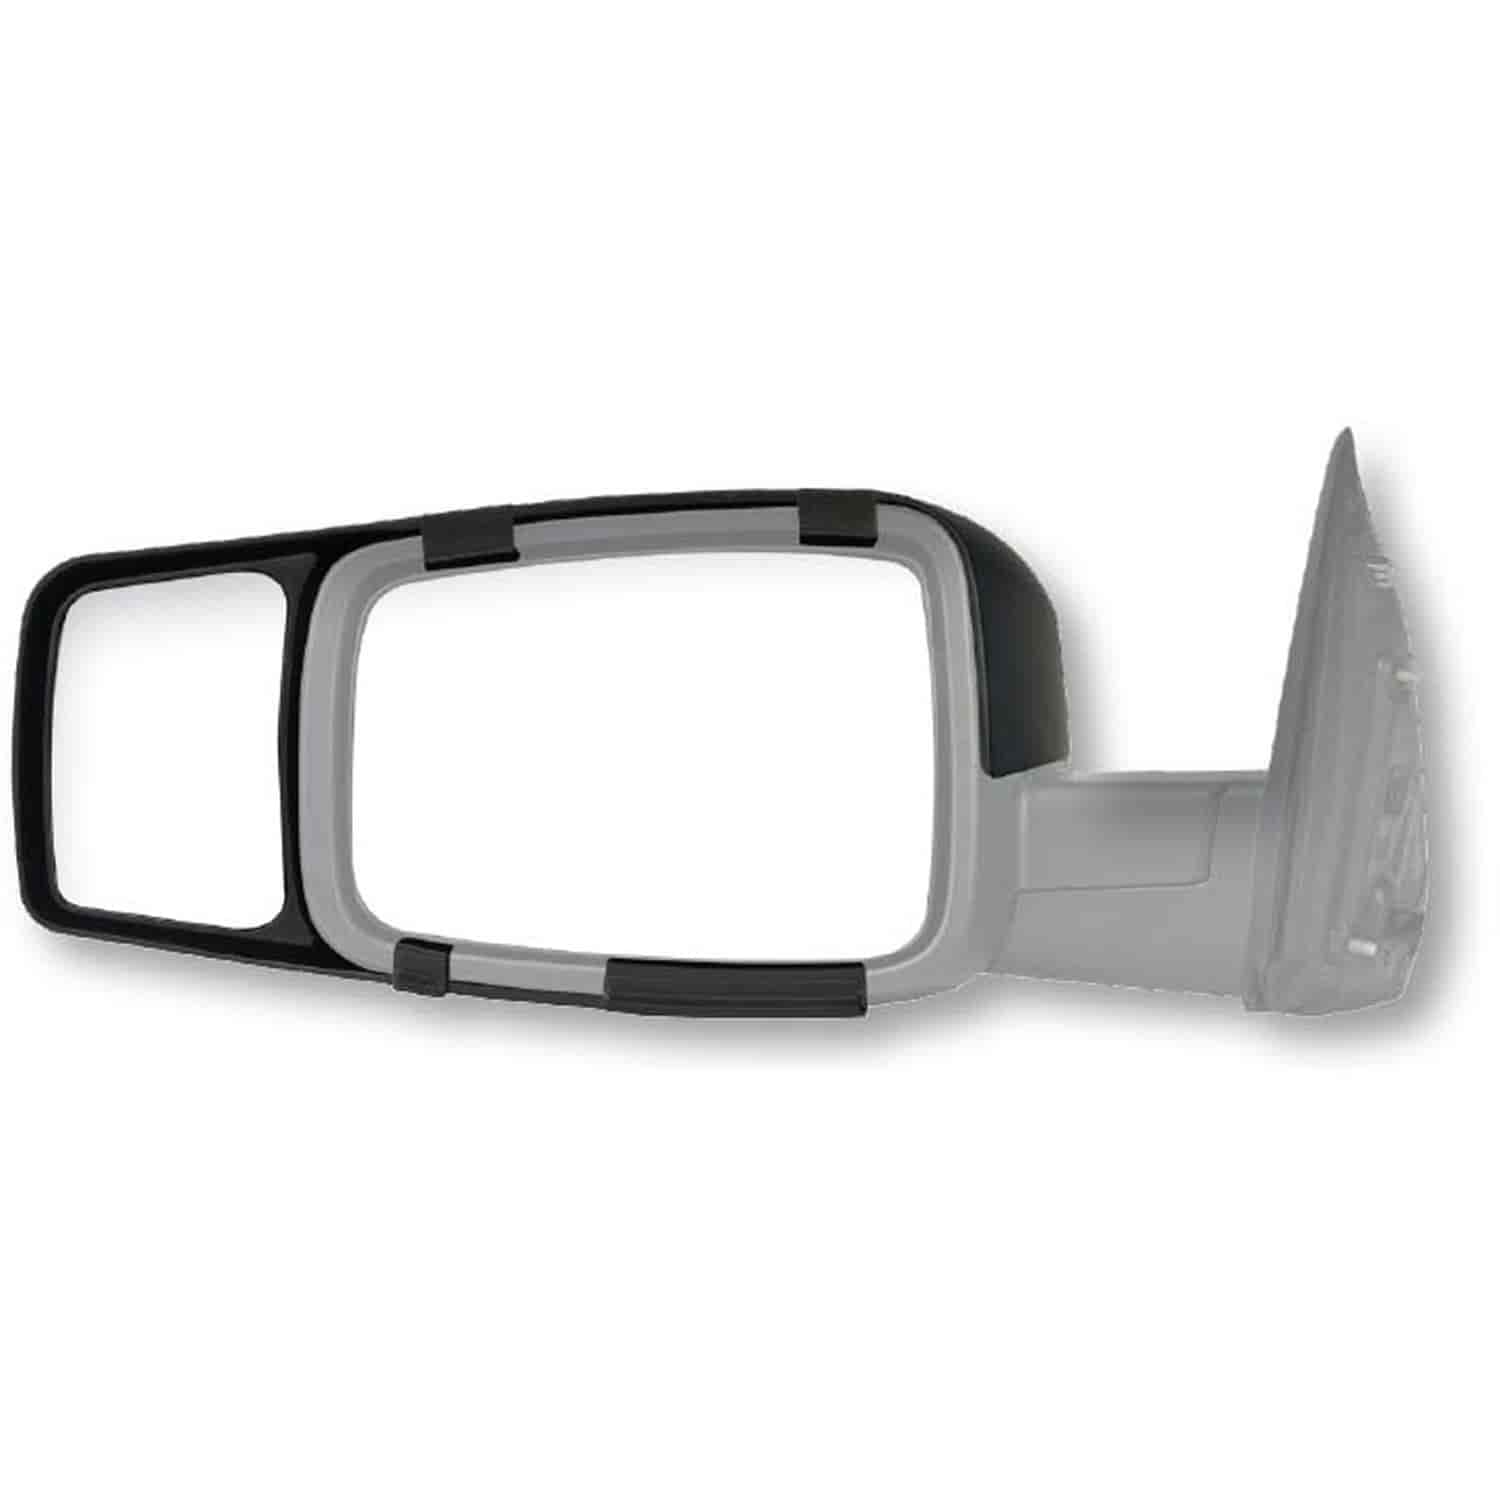 Snap-On Towing Mirrors Fits 2009 to 2014 Ram 1500